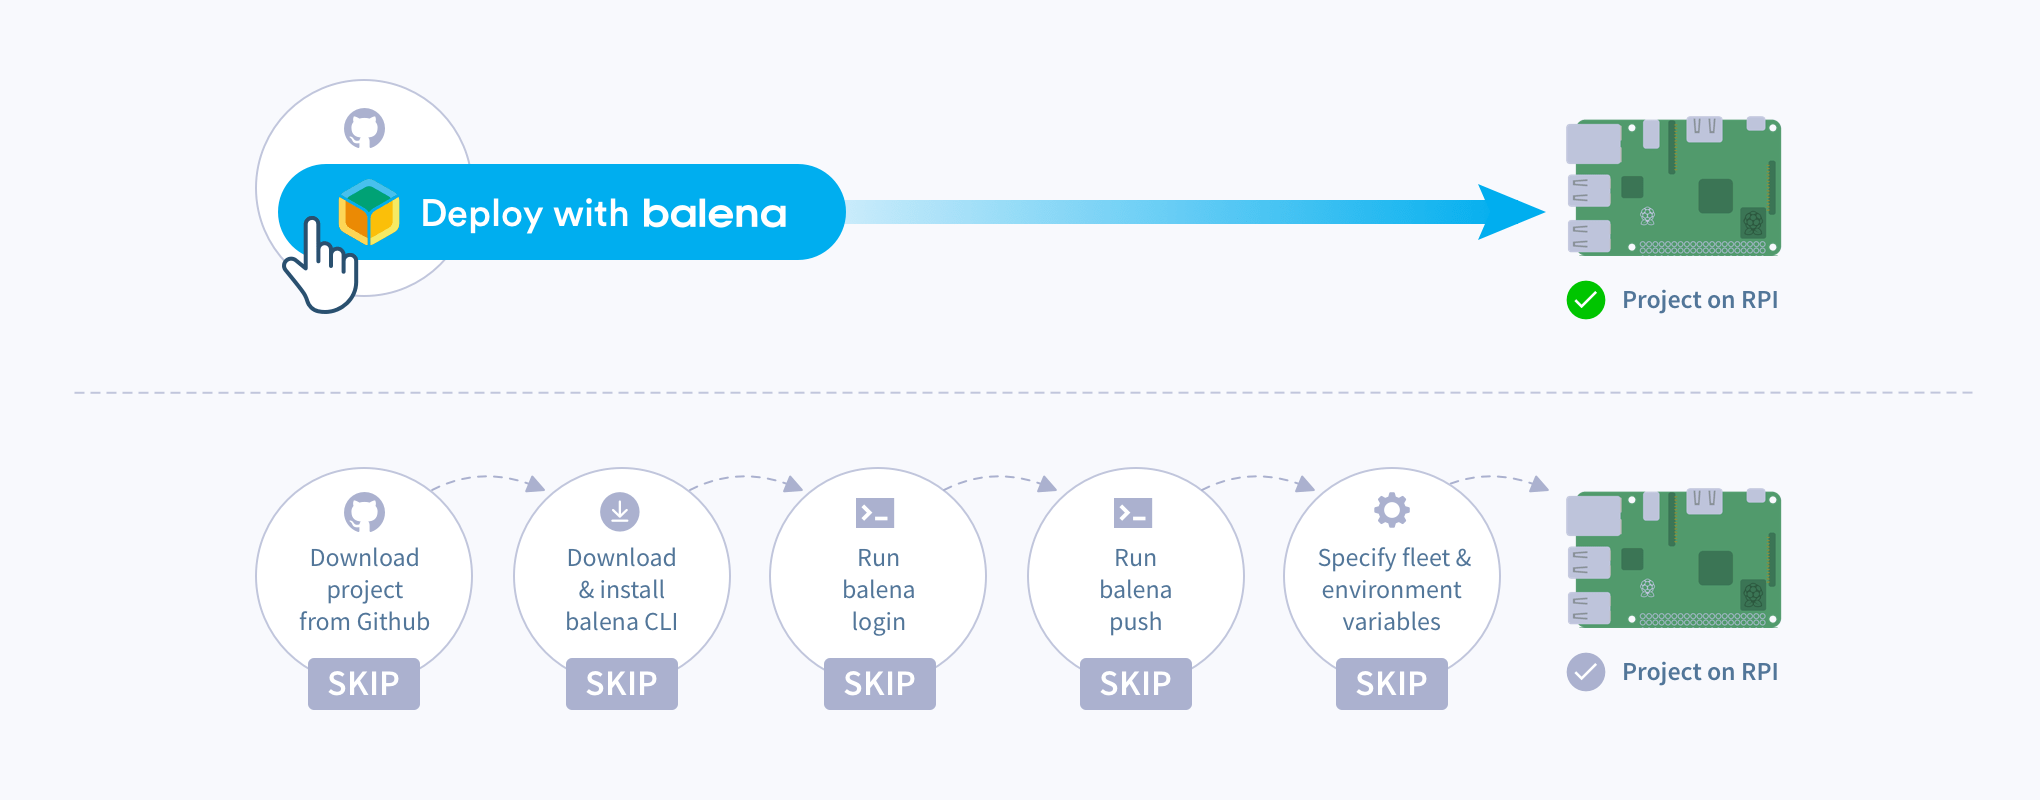 ‘Deploy with balena’ makes it easier to deploy and share IoT apps